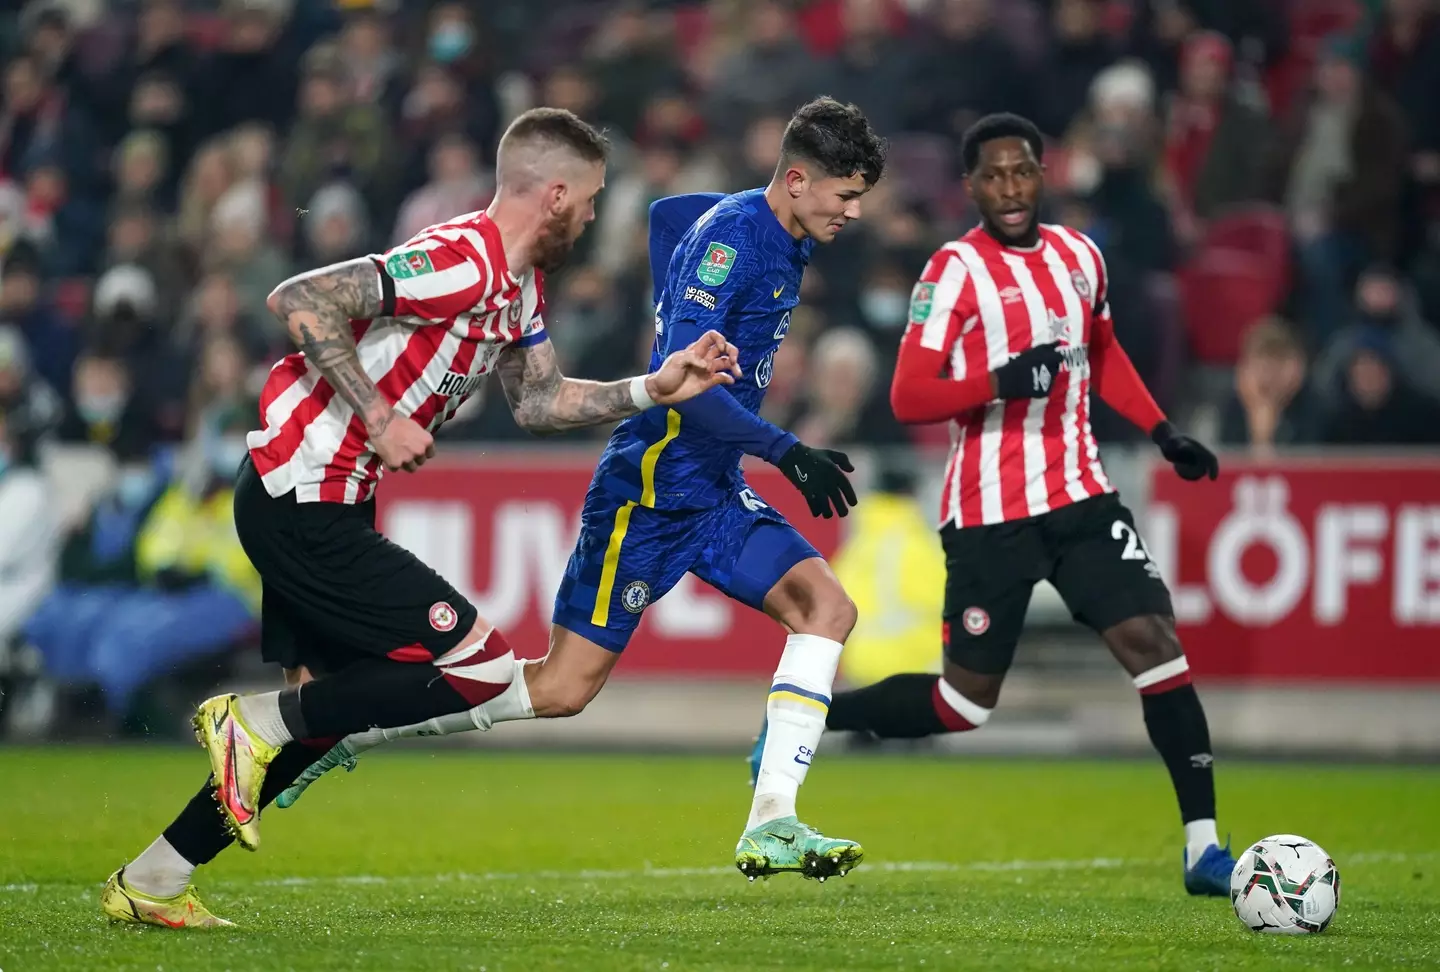 Brentford's Pontus Jansson (left) and Chelsea's Jude Soonsup-Bell in action during the Carabao Cup quarter final match at the Brentford Community Stadium. (Alamy)